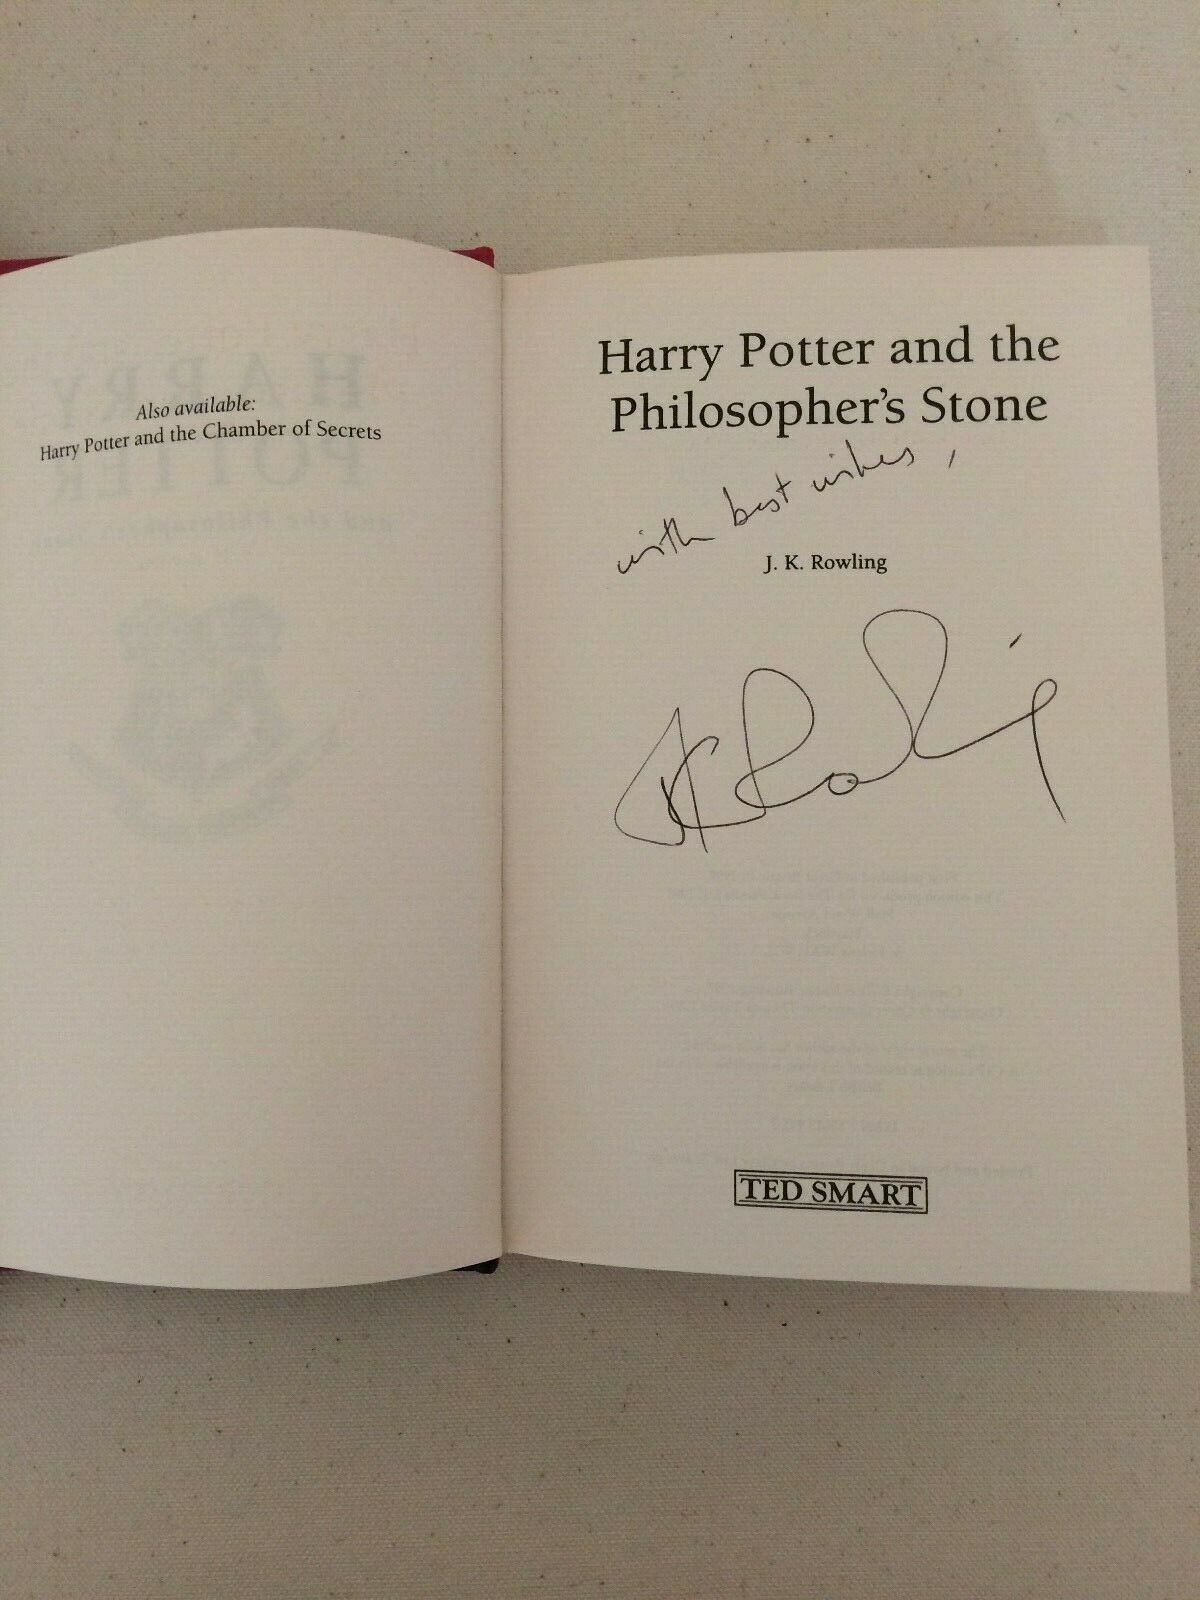 J.K. Rowling signature forgery found on ebay inside a Harry Potter and the Philosopher's Stone. Sold by beatjup0.